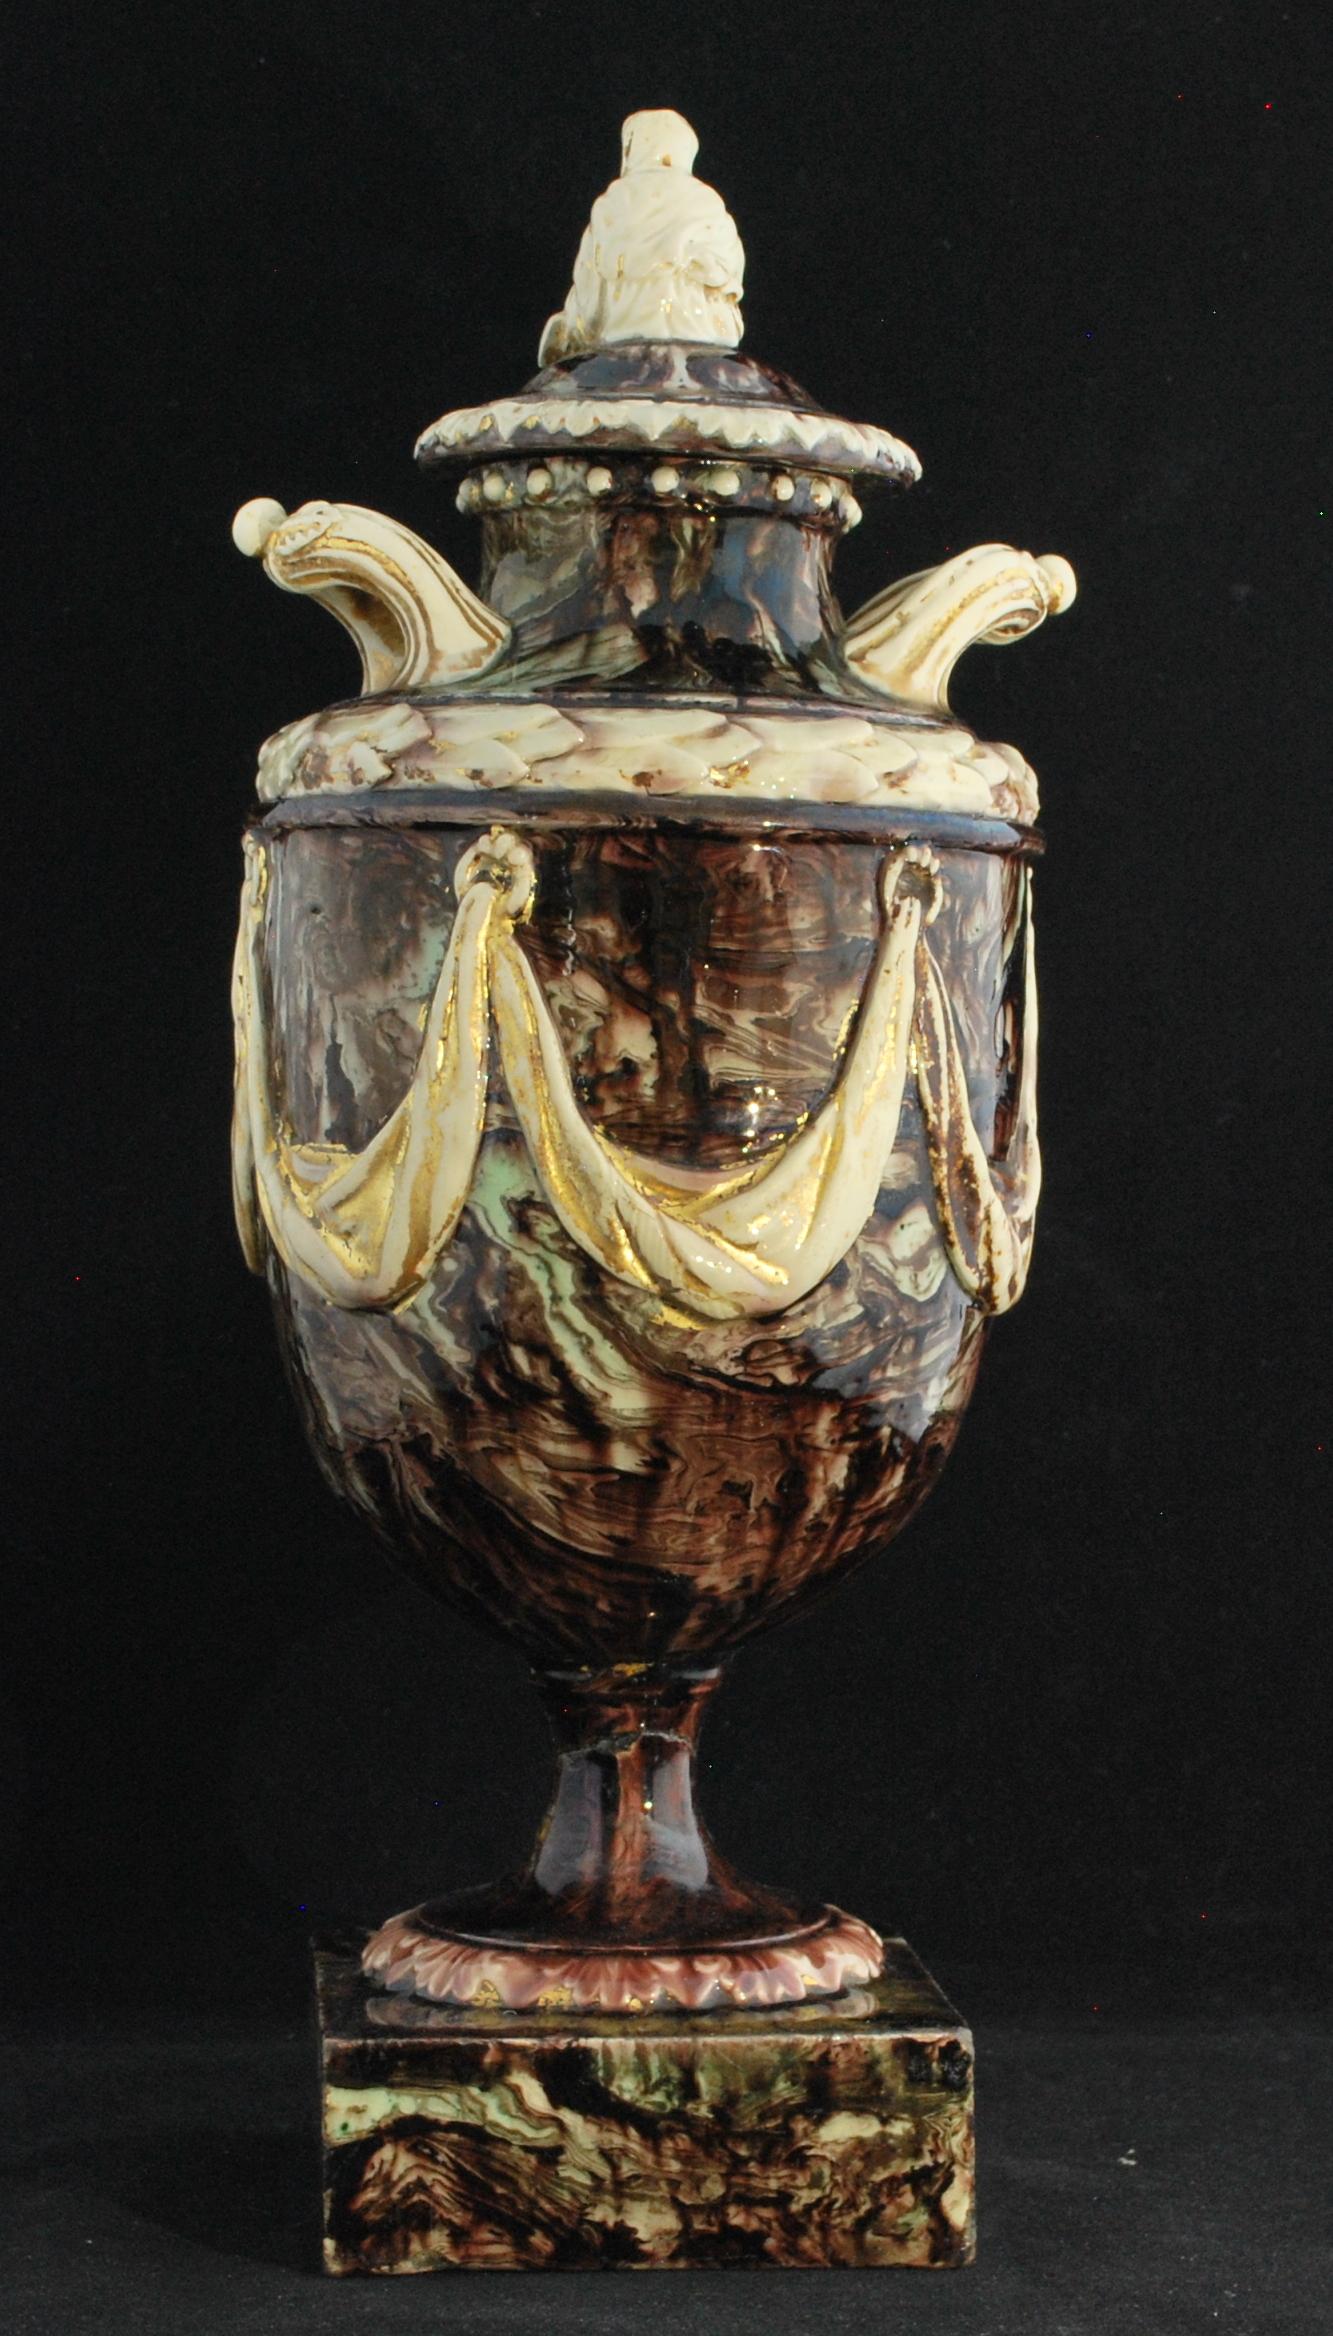 Neoclassical Agateware Vase, Attributed to Steitz, circa 1775